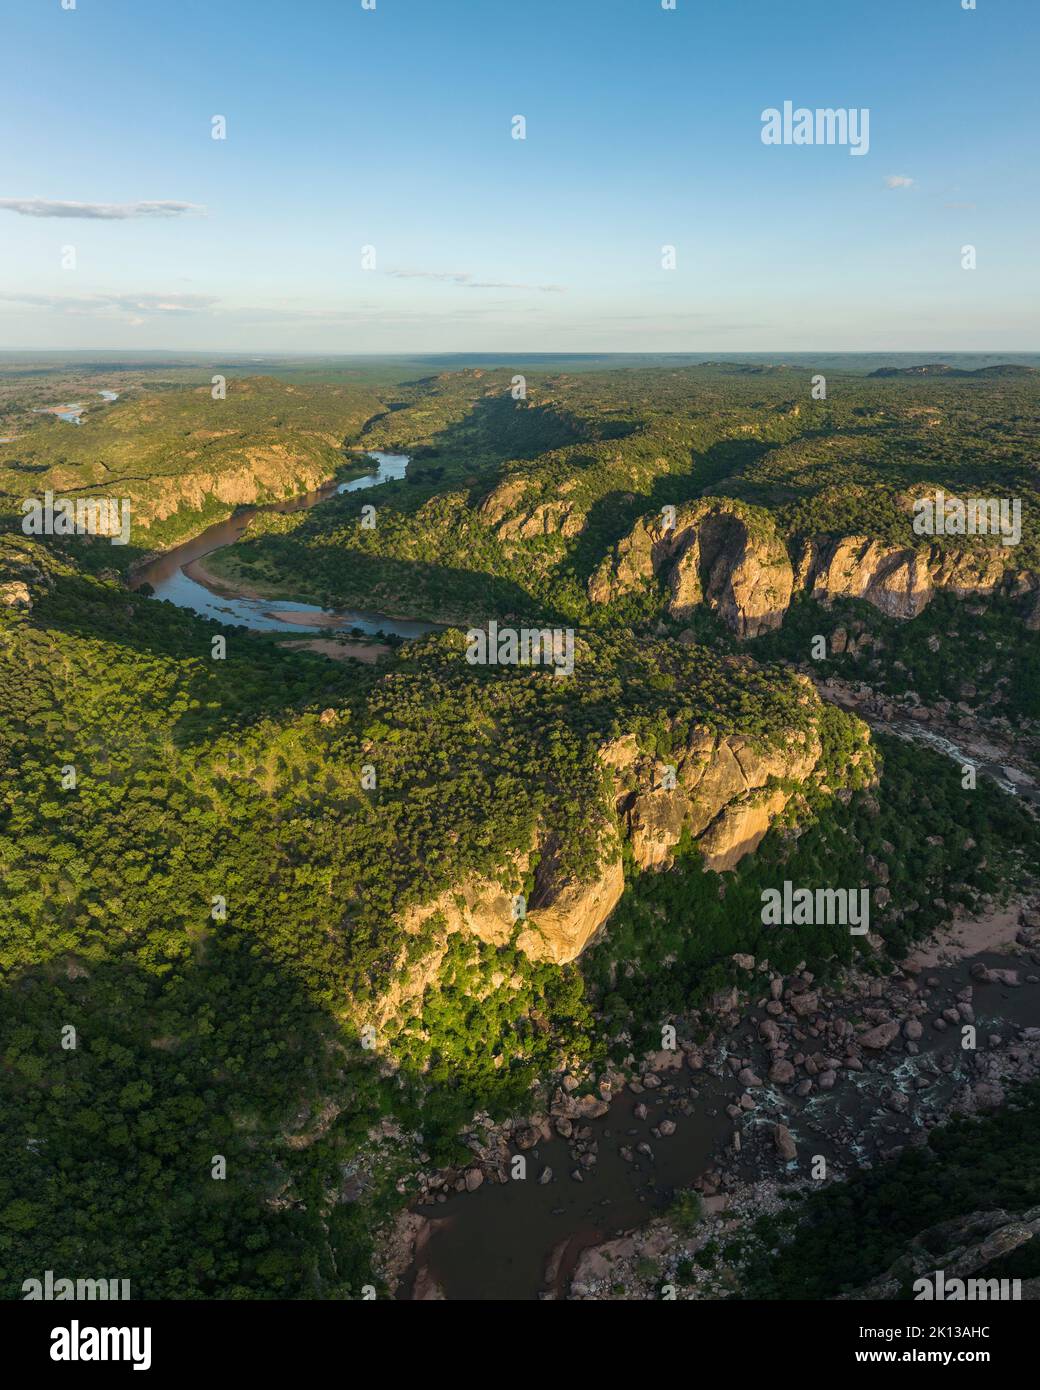 Lanner Gorge, Makuleke Contractual Park, Kruger National Park, South Africa, Africa Stock Photo